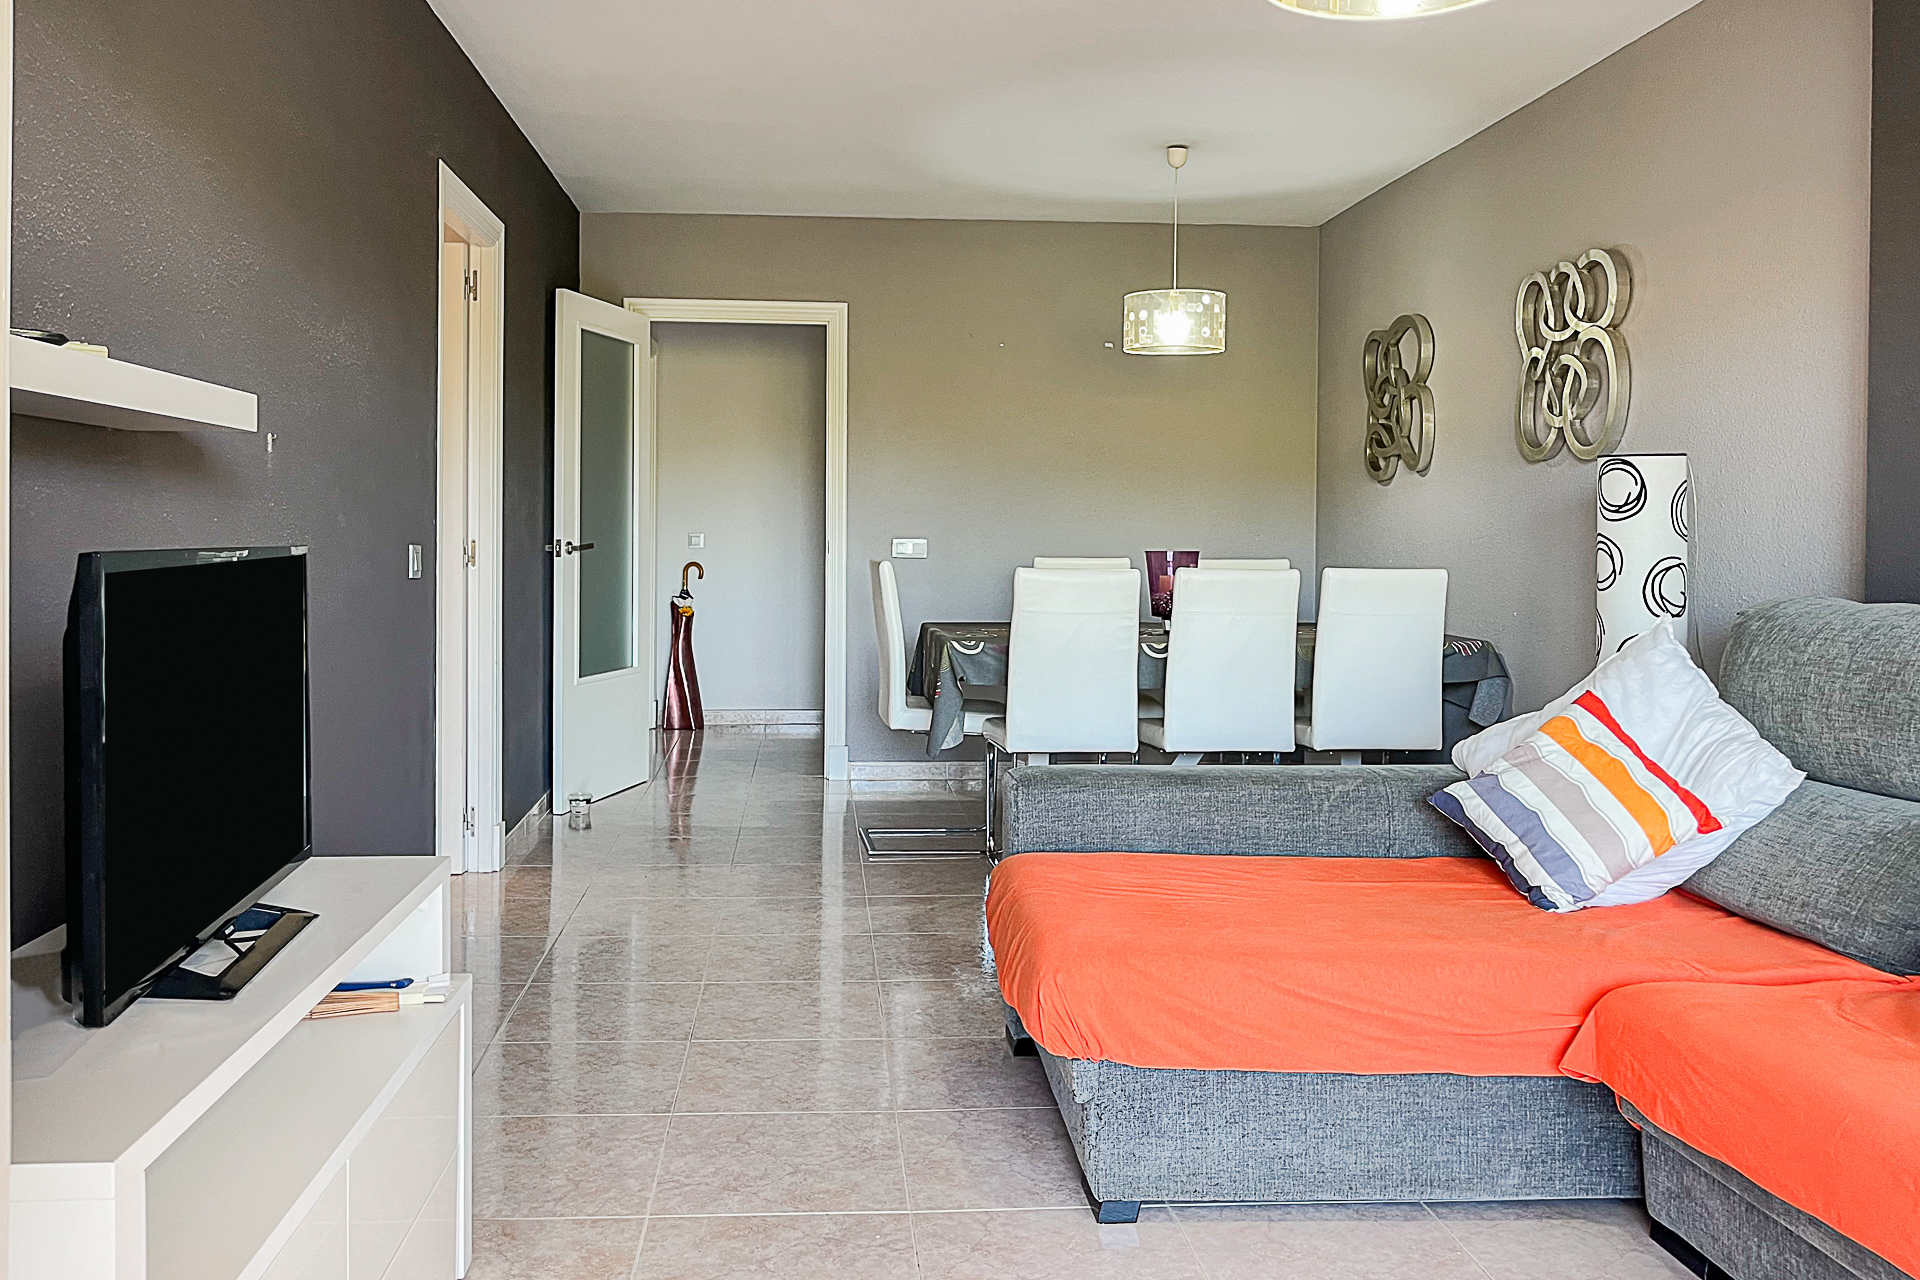 Modern furnished flat with 3 bedrooms and underground parking space, 07590 Cala Ratjada (Spain), Penthouse